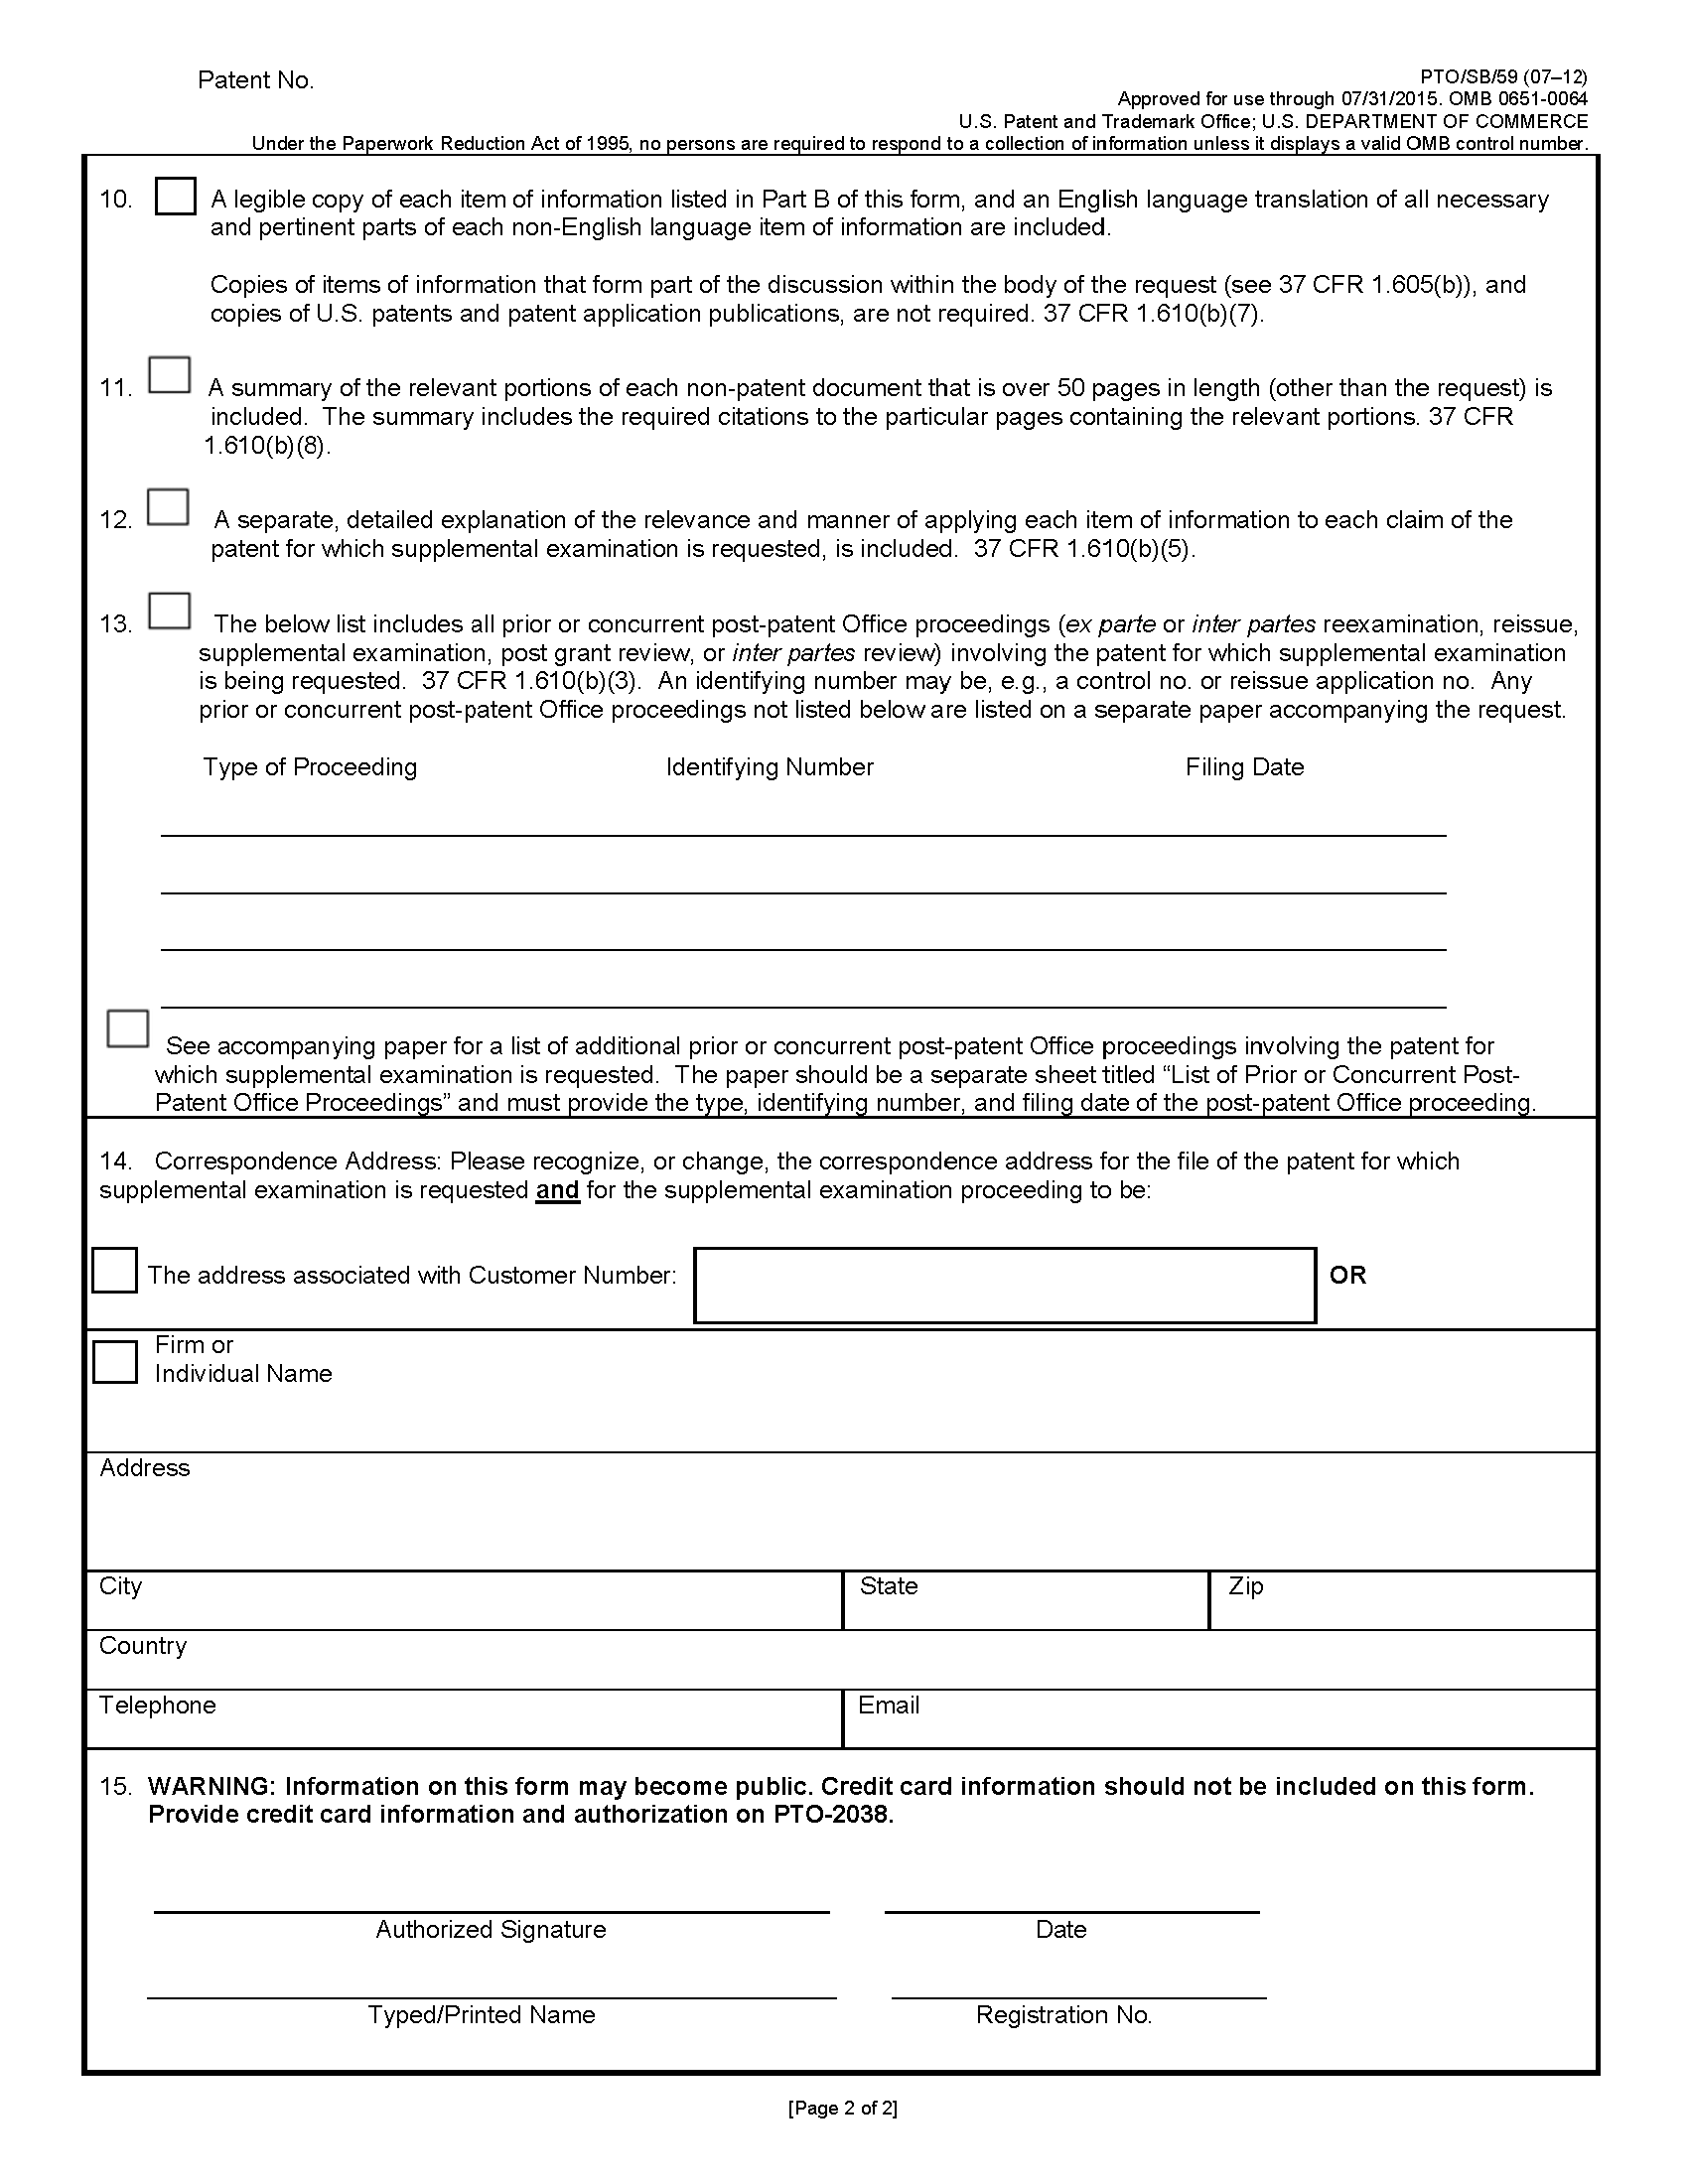 Form PTO/SB/59. Page 2 of 2. Request for Supplemantal Examination Transmittal Form.